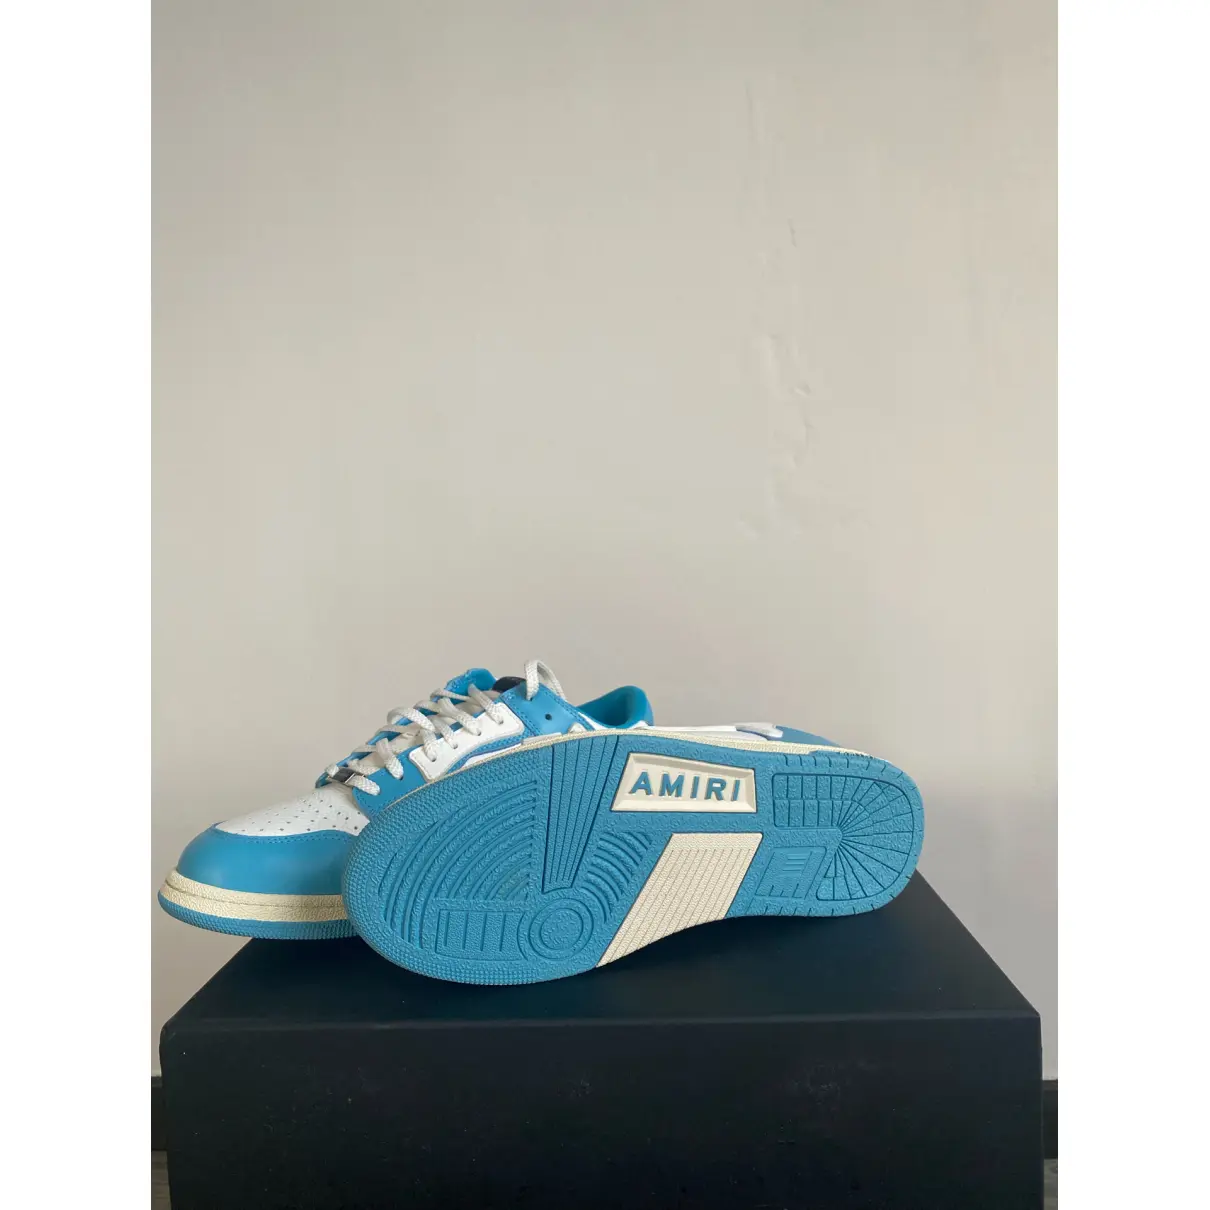 Buy Amiri Leather low trainers online